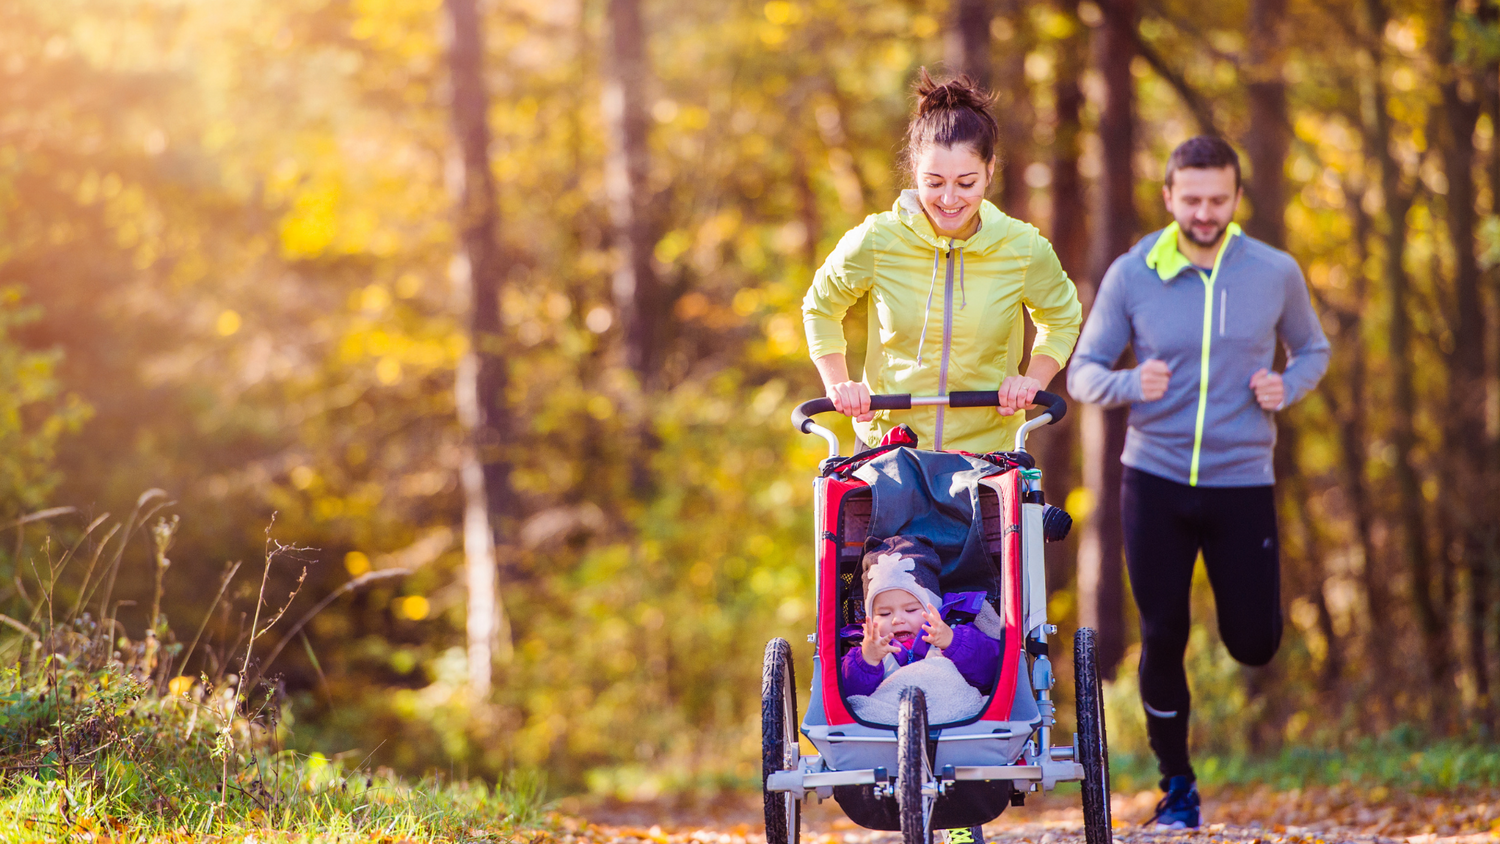 Fall Fitness Tips: Maintaining an Active Lifestyle as the Weather Changes